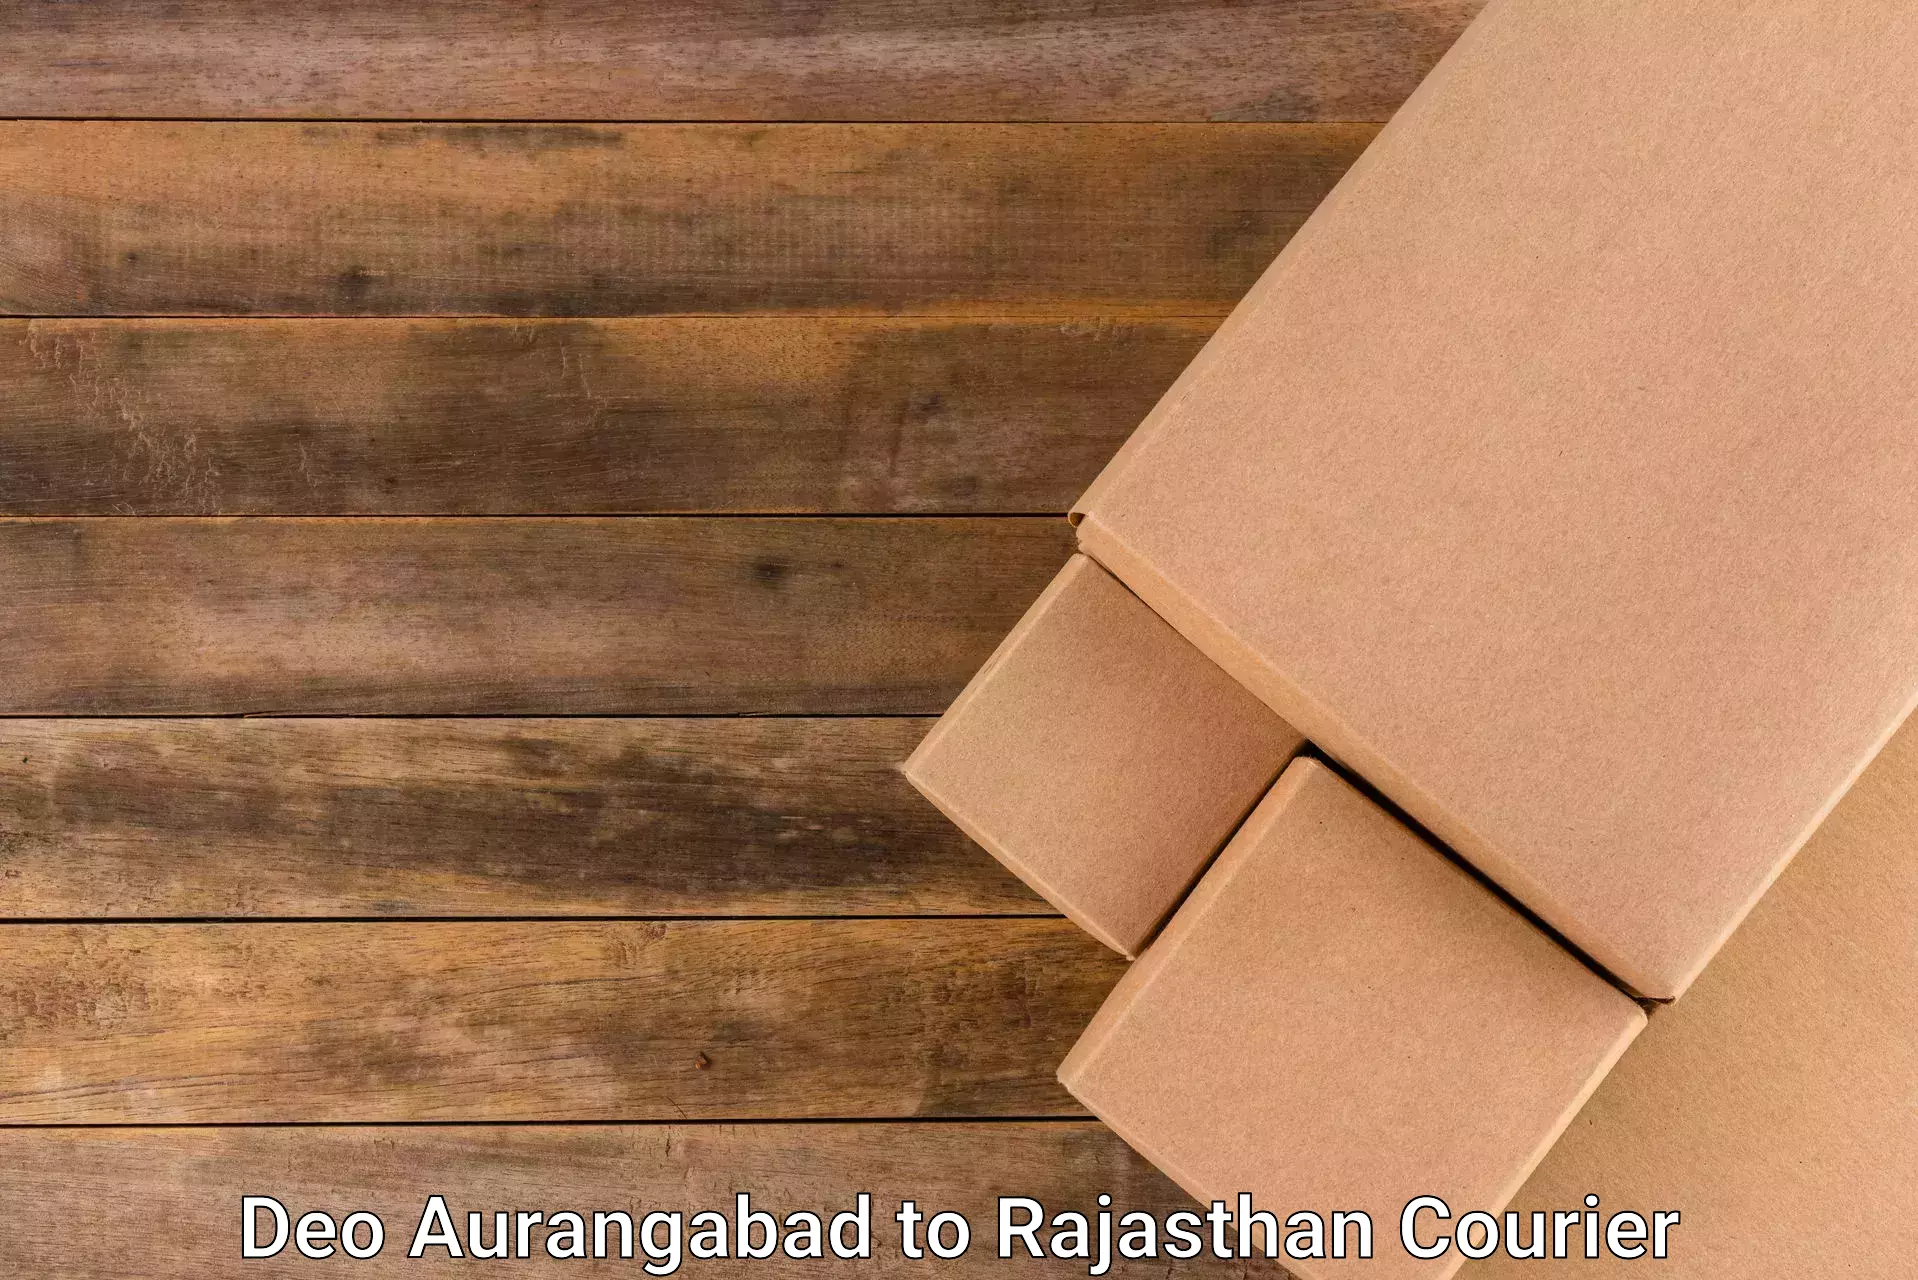 Courier service efficiency Deo Aurangabad to Rajasthan